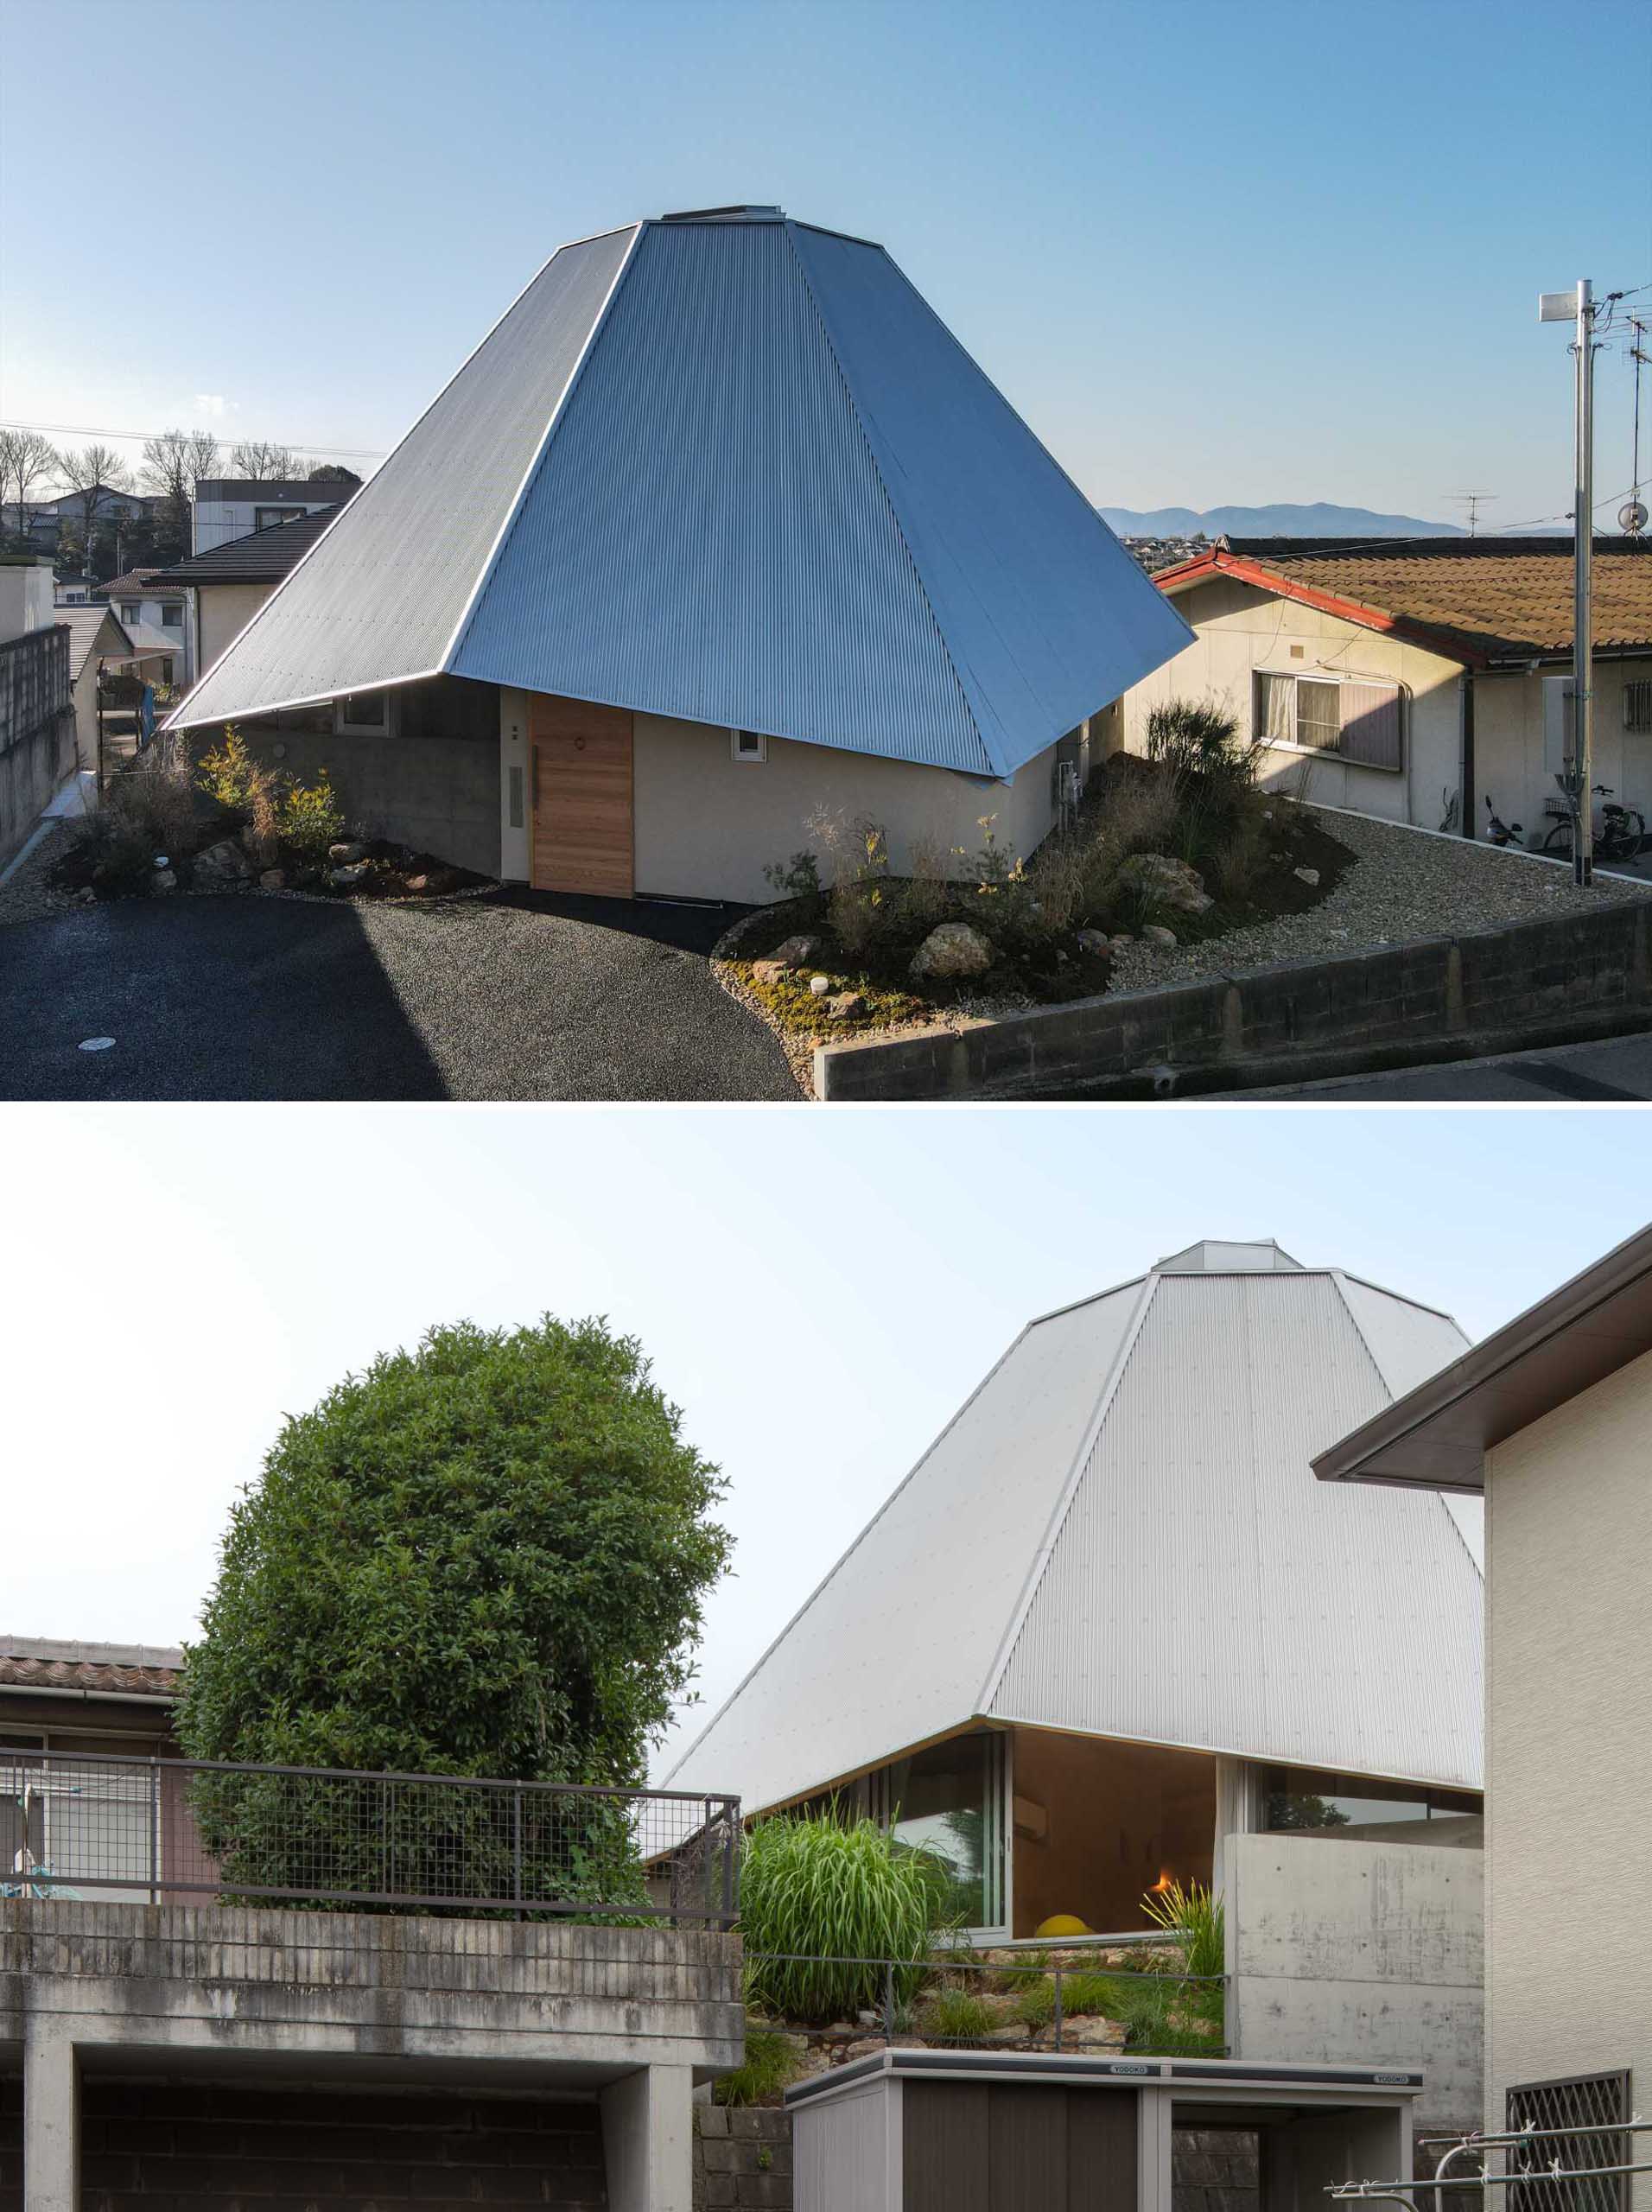 UID Architects has designed a new home in Fukuyama, Japan, with a unique shape inspired by a spiderweb.